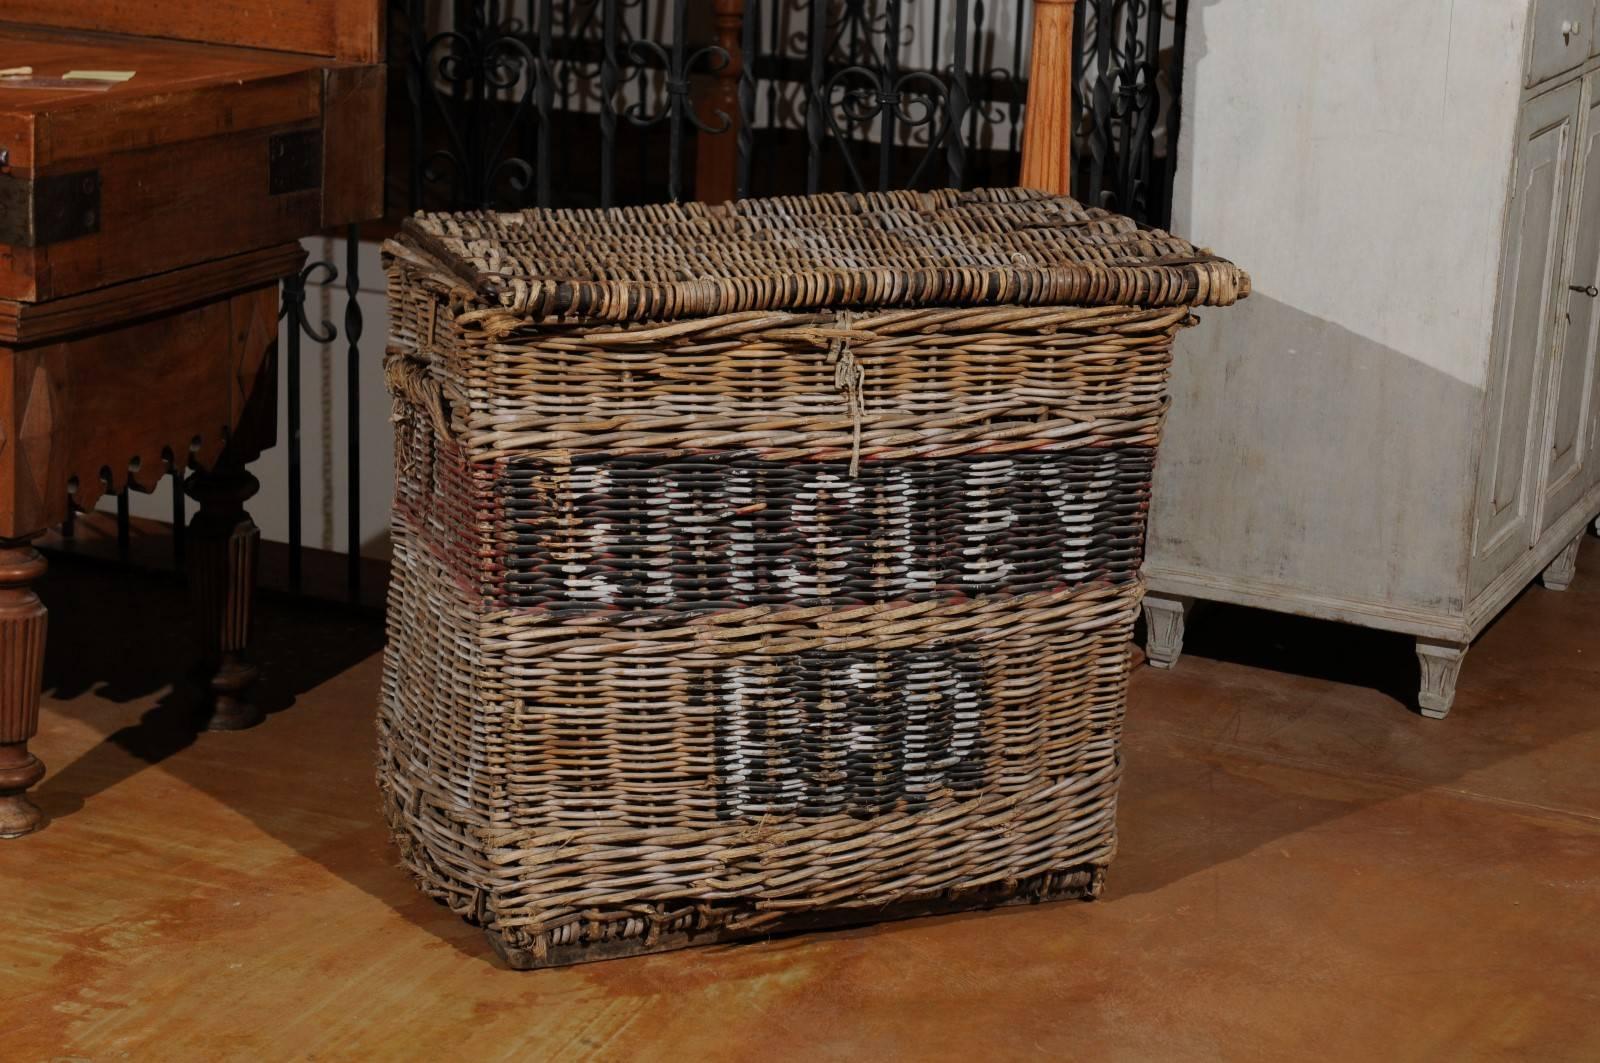 A large English antique wicker hamper basket from the 19th century. This English linen basket features a lid that opens to reveal great storage possibilities, perhaps used as a hamper or toy basket. The lateral handles allow the piece to be moved